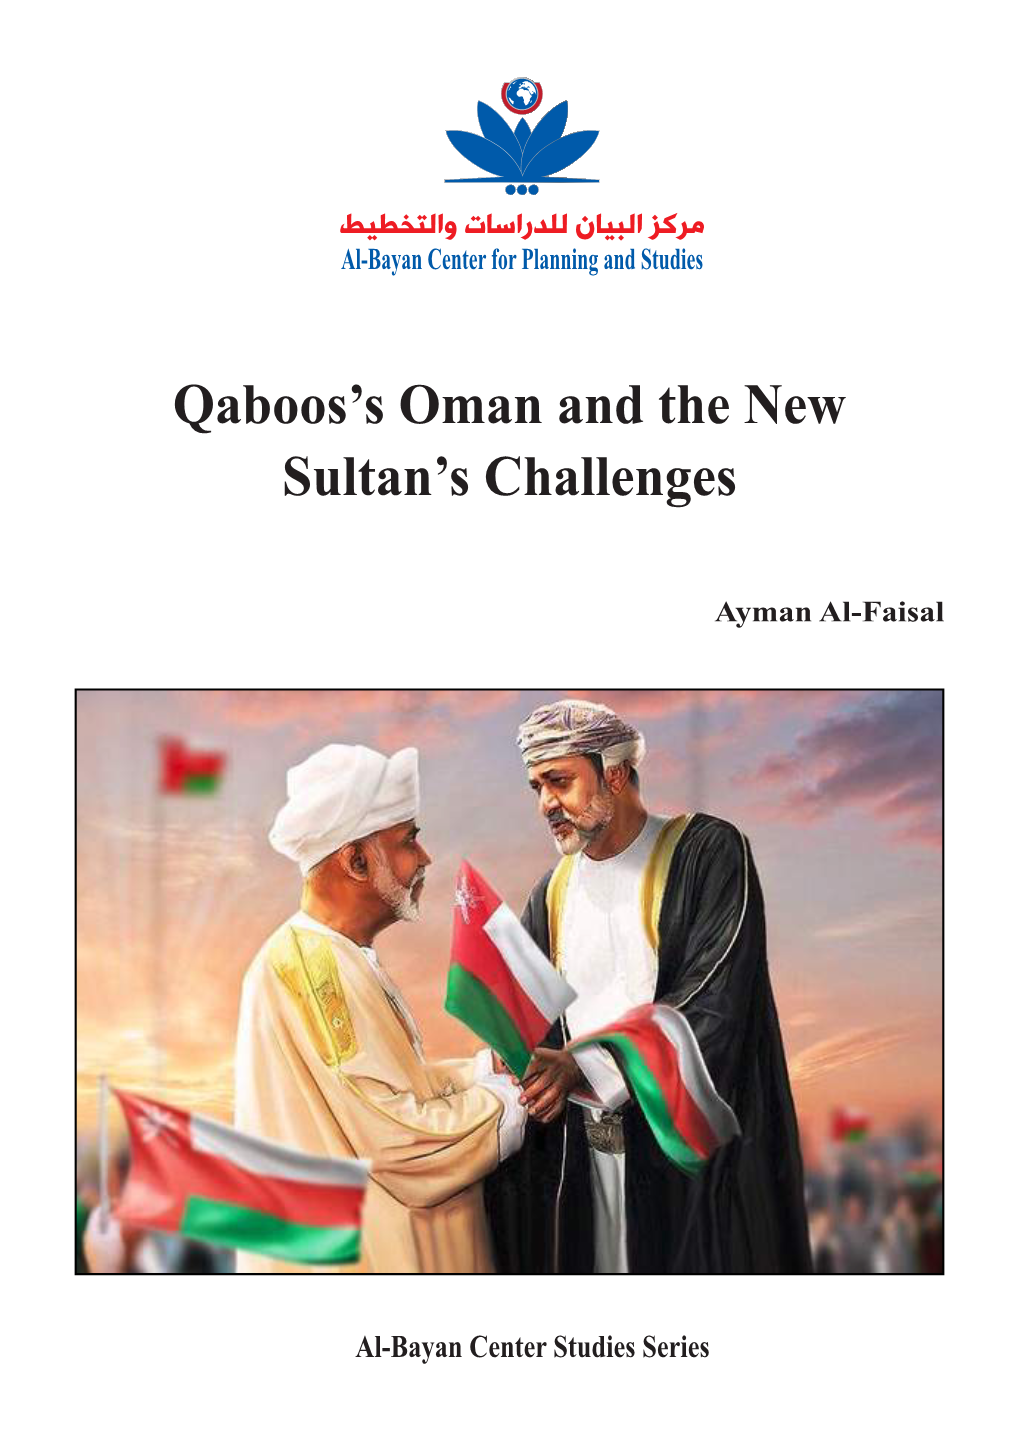 Qaboos's Oman and the New Sultan's Challenges